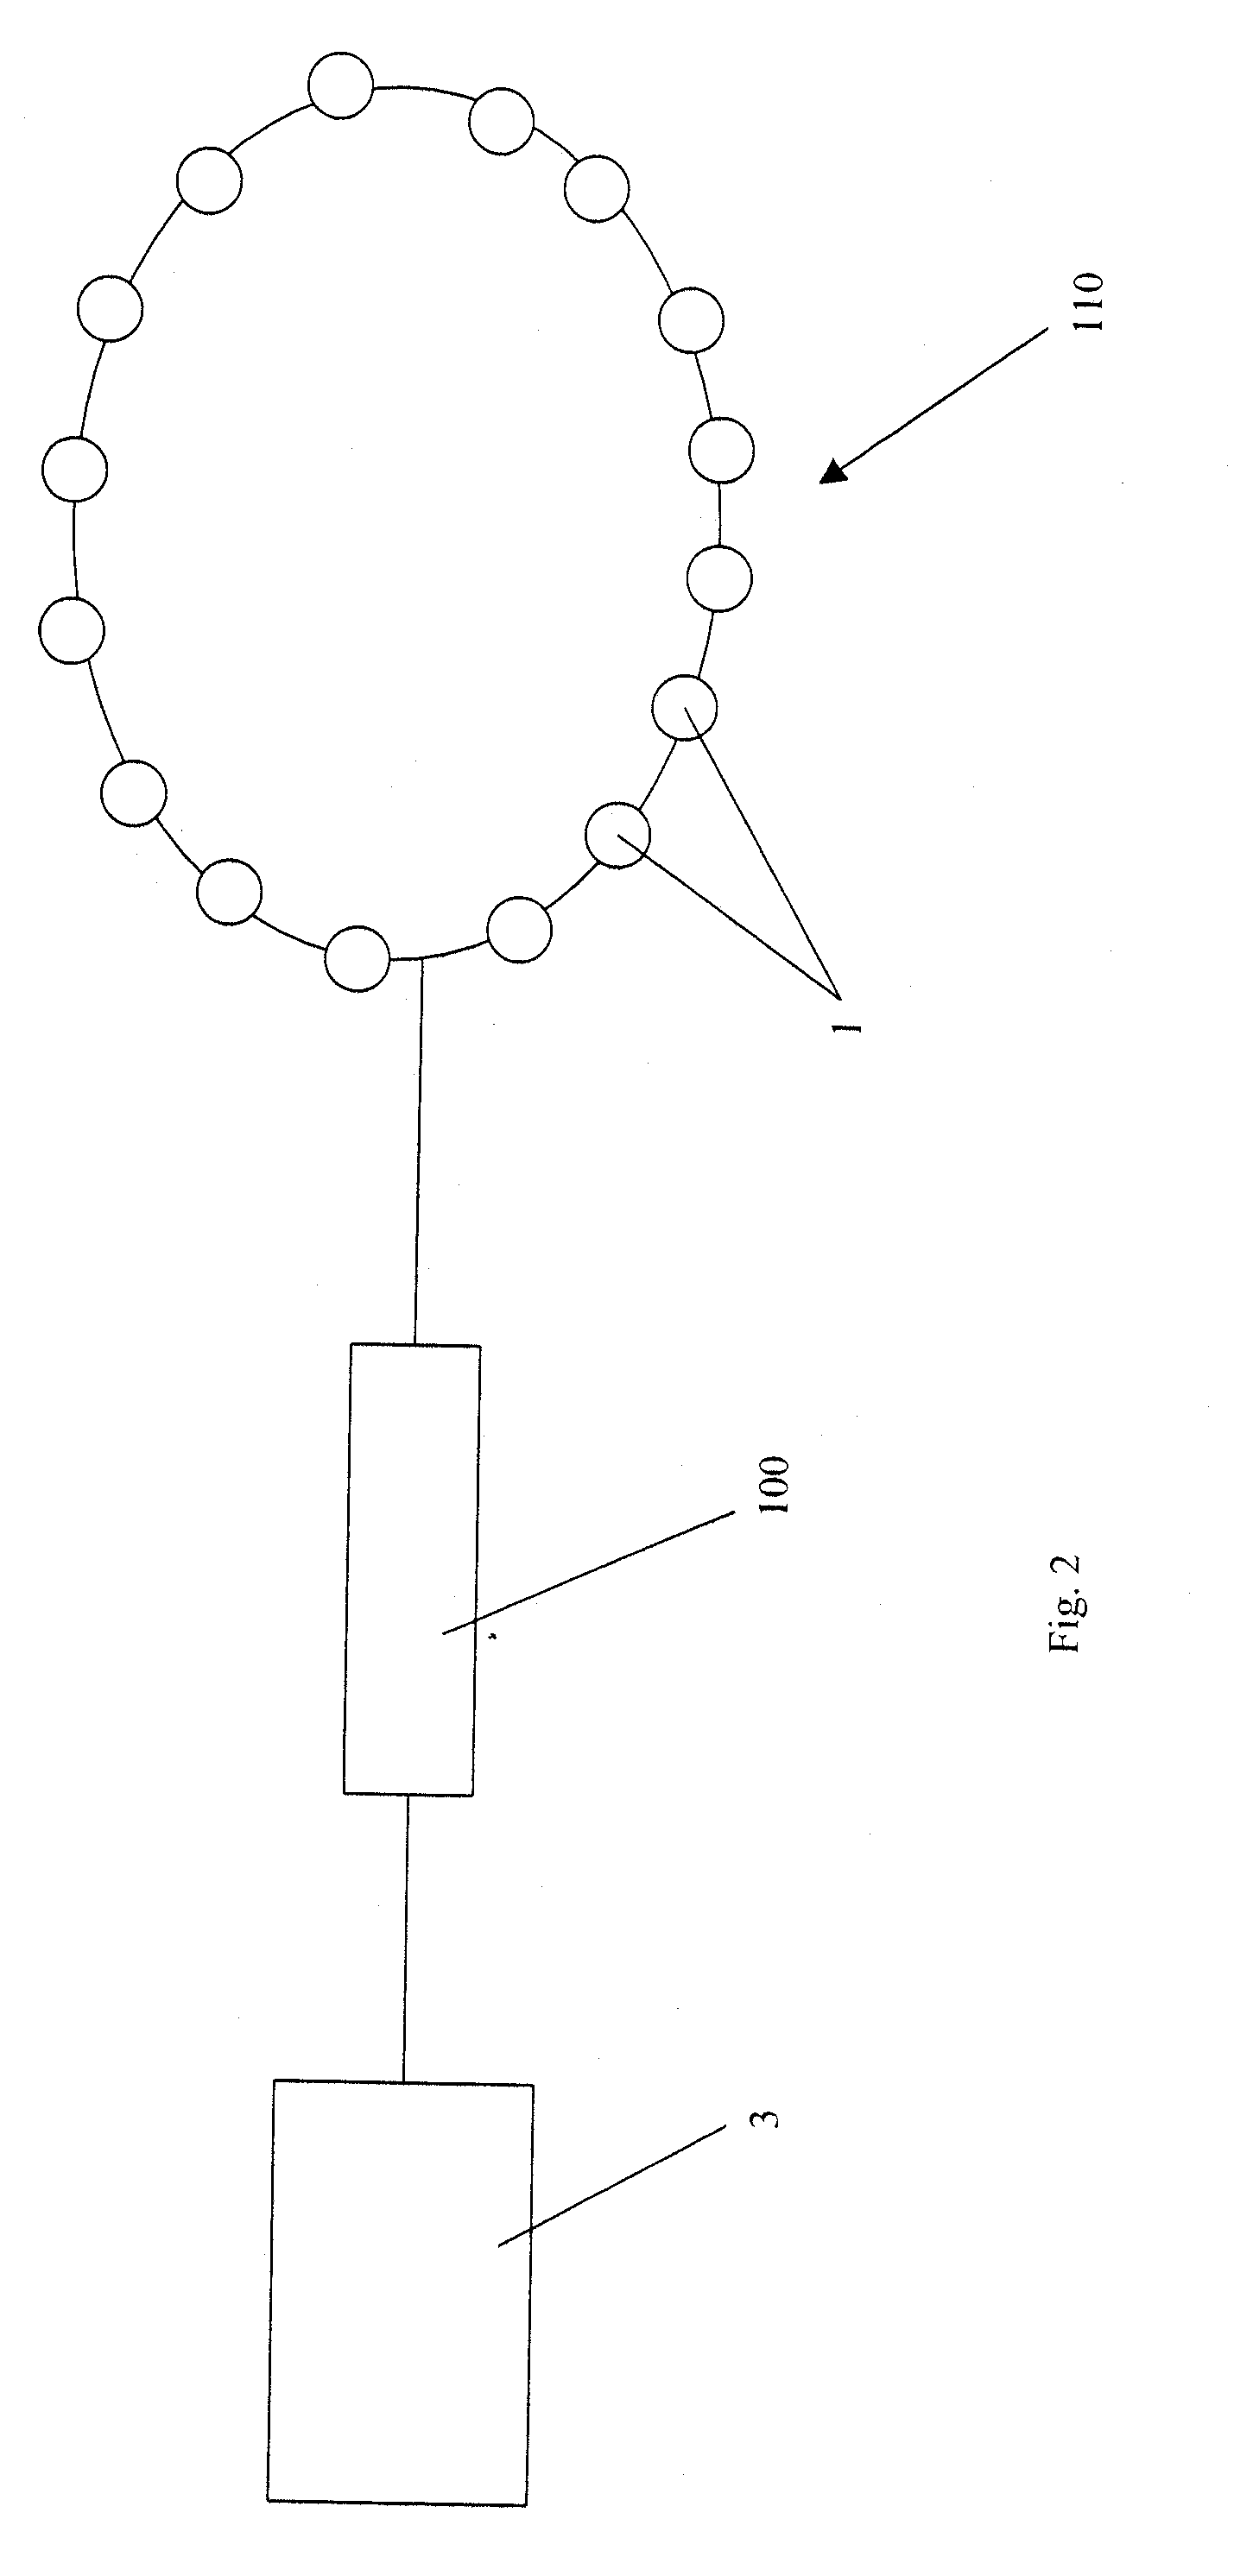 Device for protecting an electric impedance tomograph from overvoltage pulses